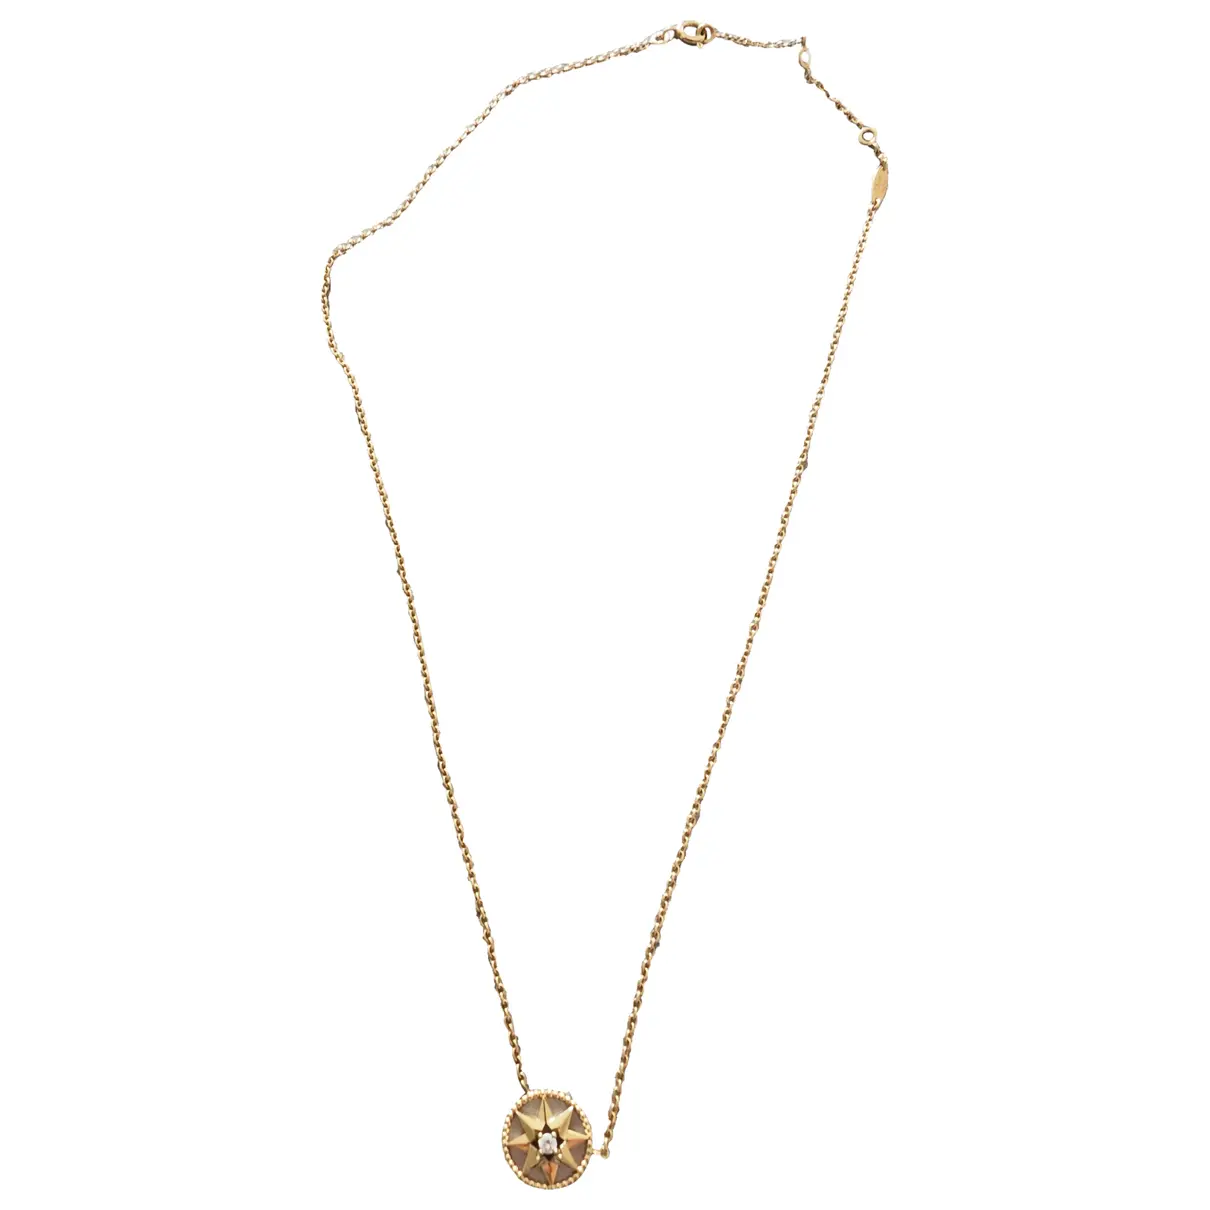 Rose des vents yellow gold necklace